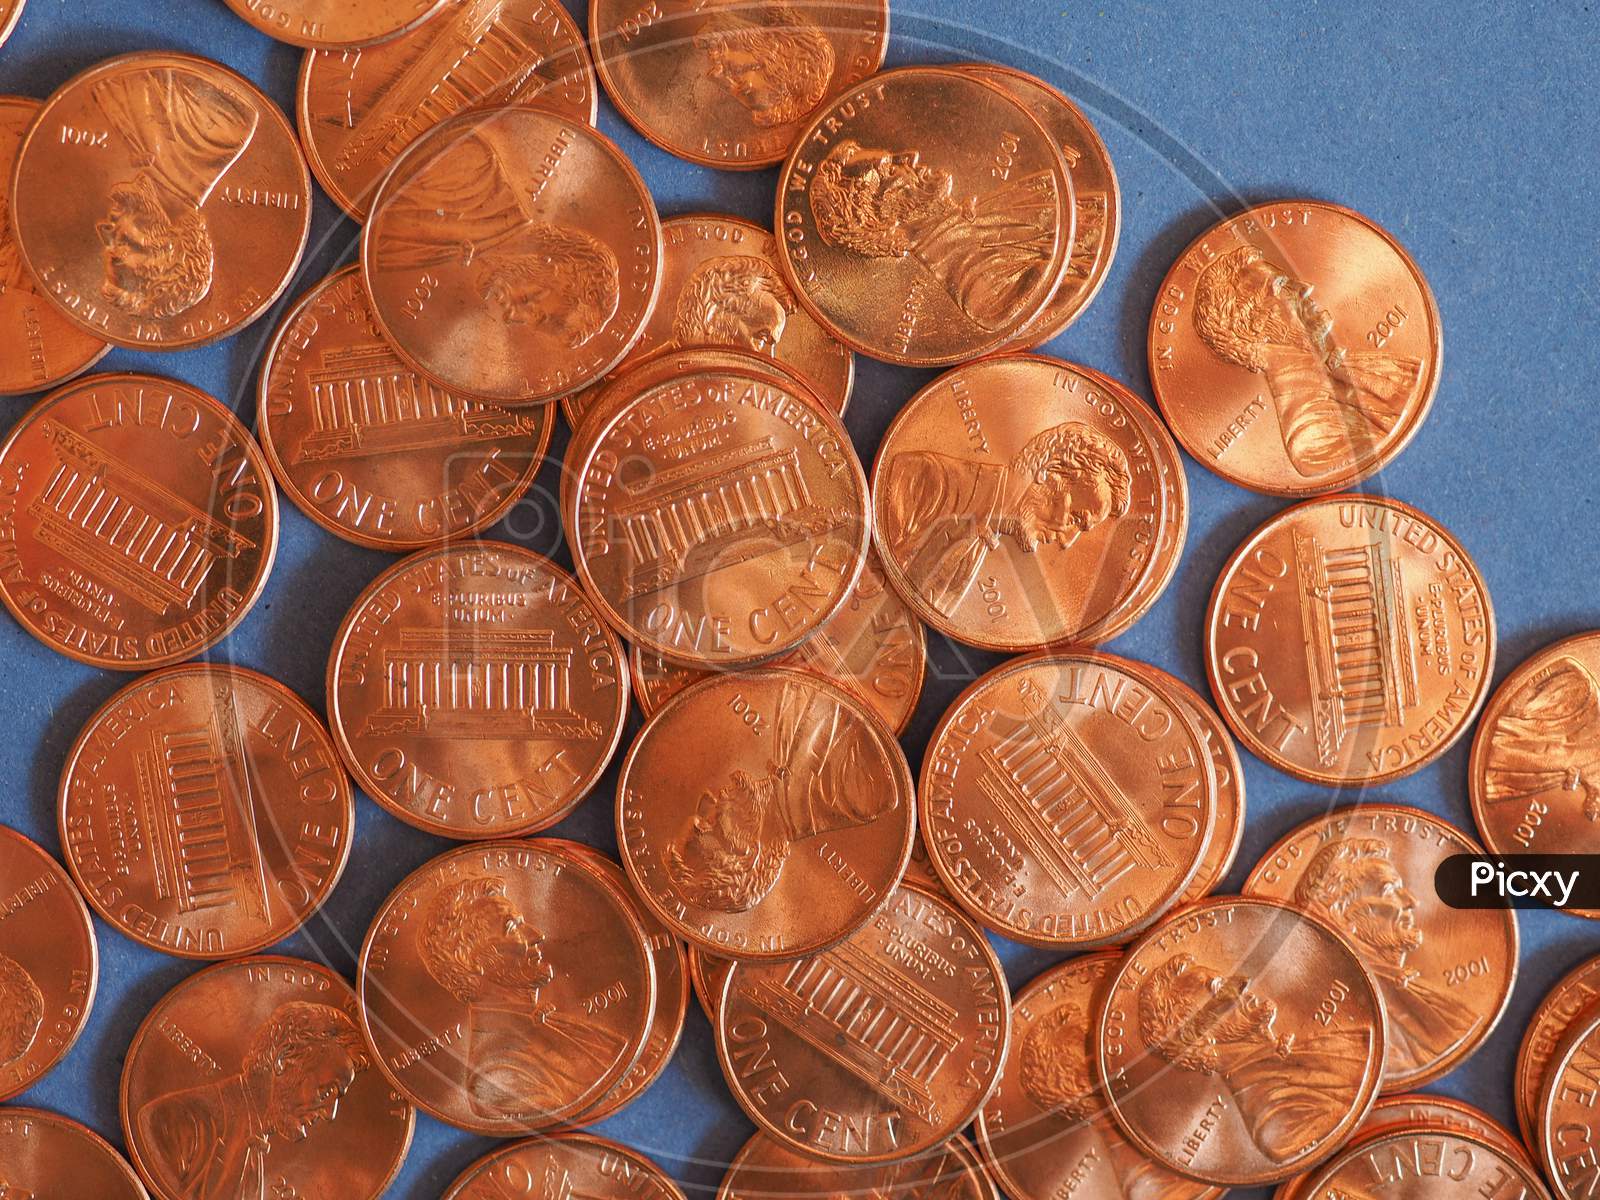 One Cent Dollar Coins, United States Over Blue